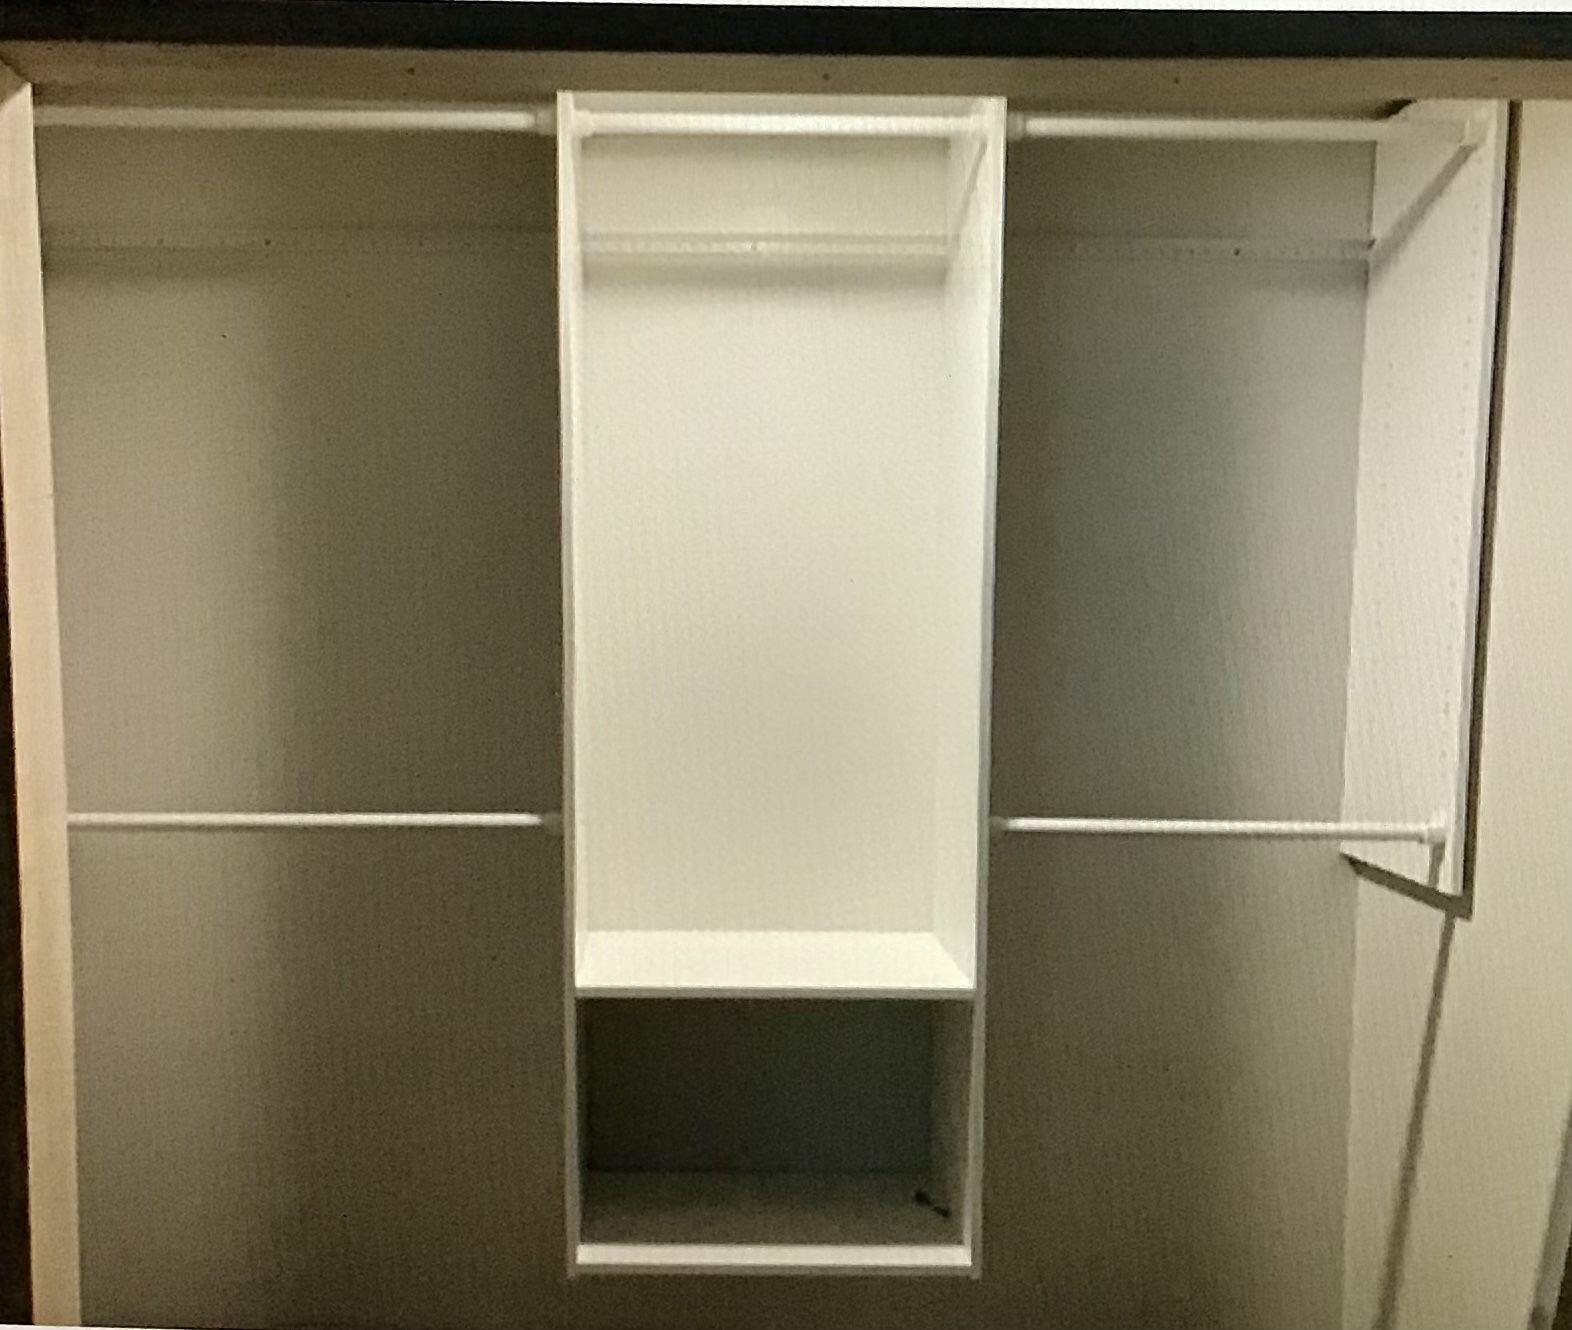 Closet Clothing Organizer With Multiple Clothing Rods And Shelves